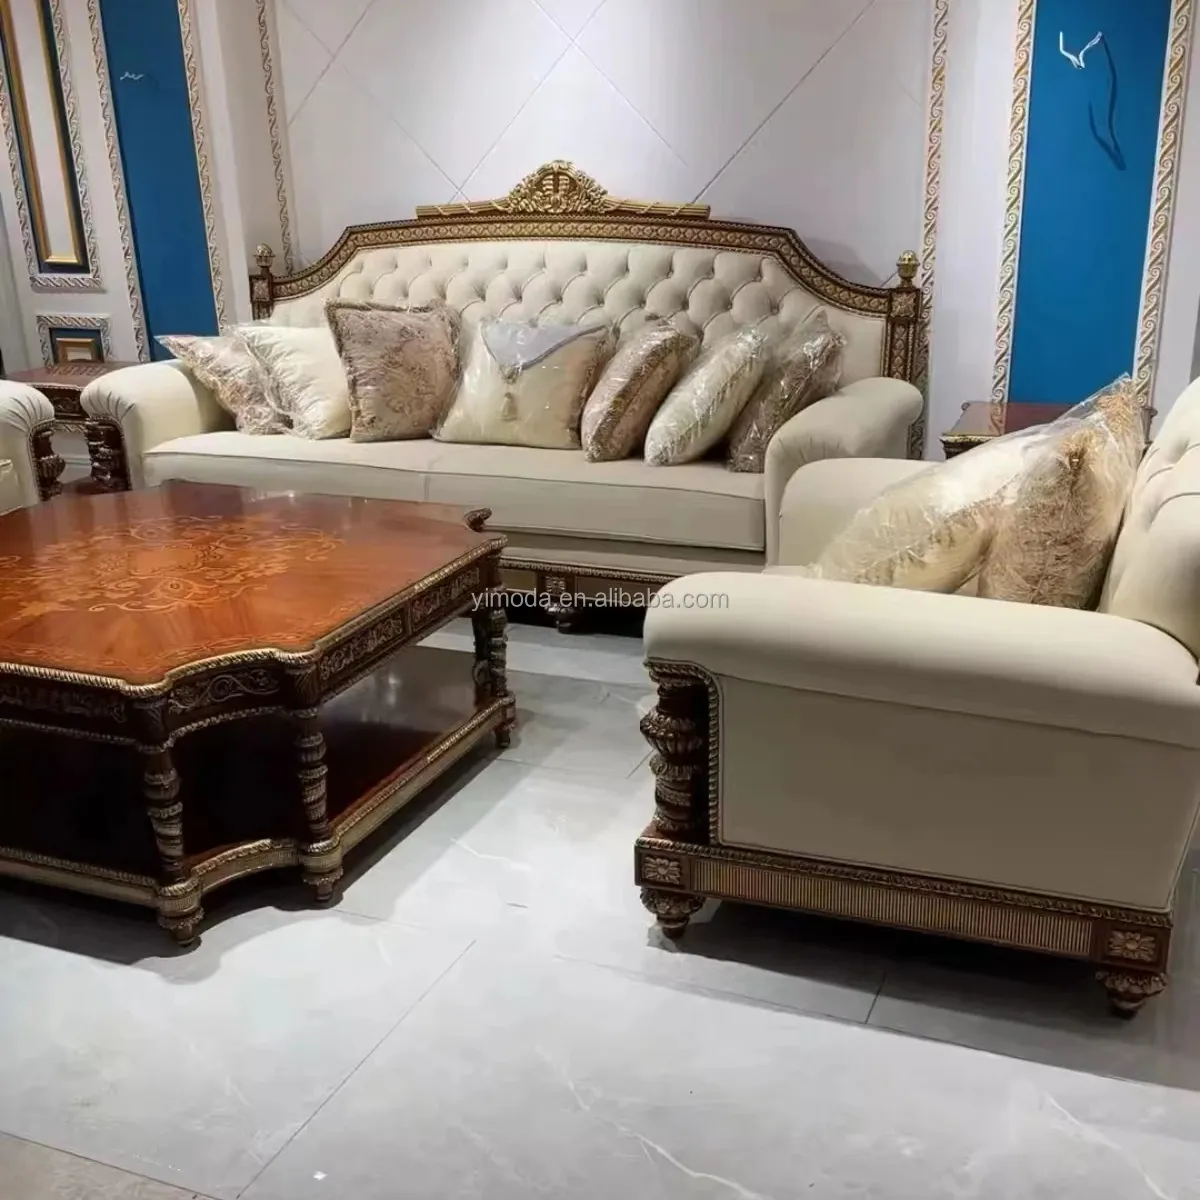 European style royal victorian vintage classic sofa furniture luxury classic carved solid wood sofa set